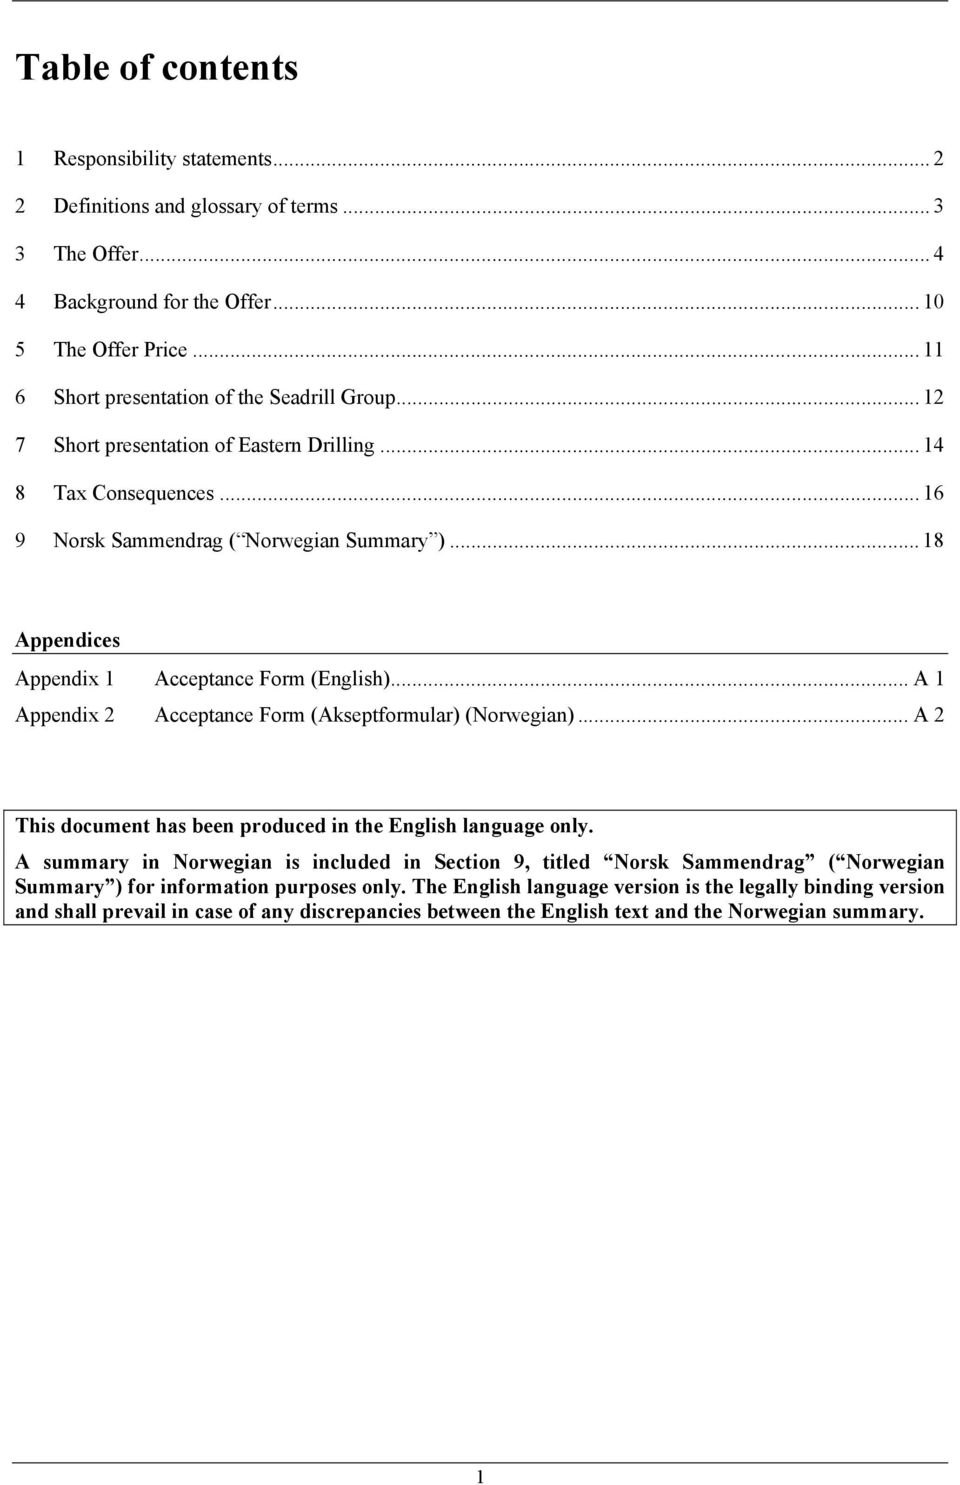 .. 18 Appendices Appendix 1 Acceptance Form (English)... A 1 Appendix 2 Acceptance Form (Akseptformular) (Norwegian)... A 2 This document has been produced in the English language only.